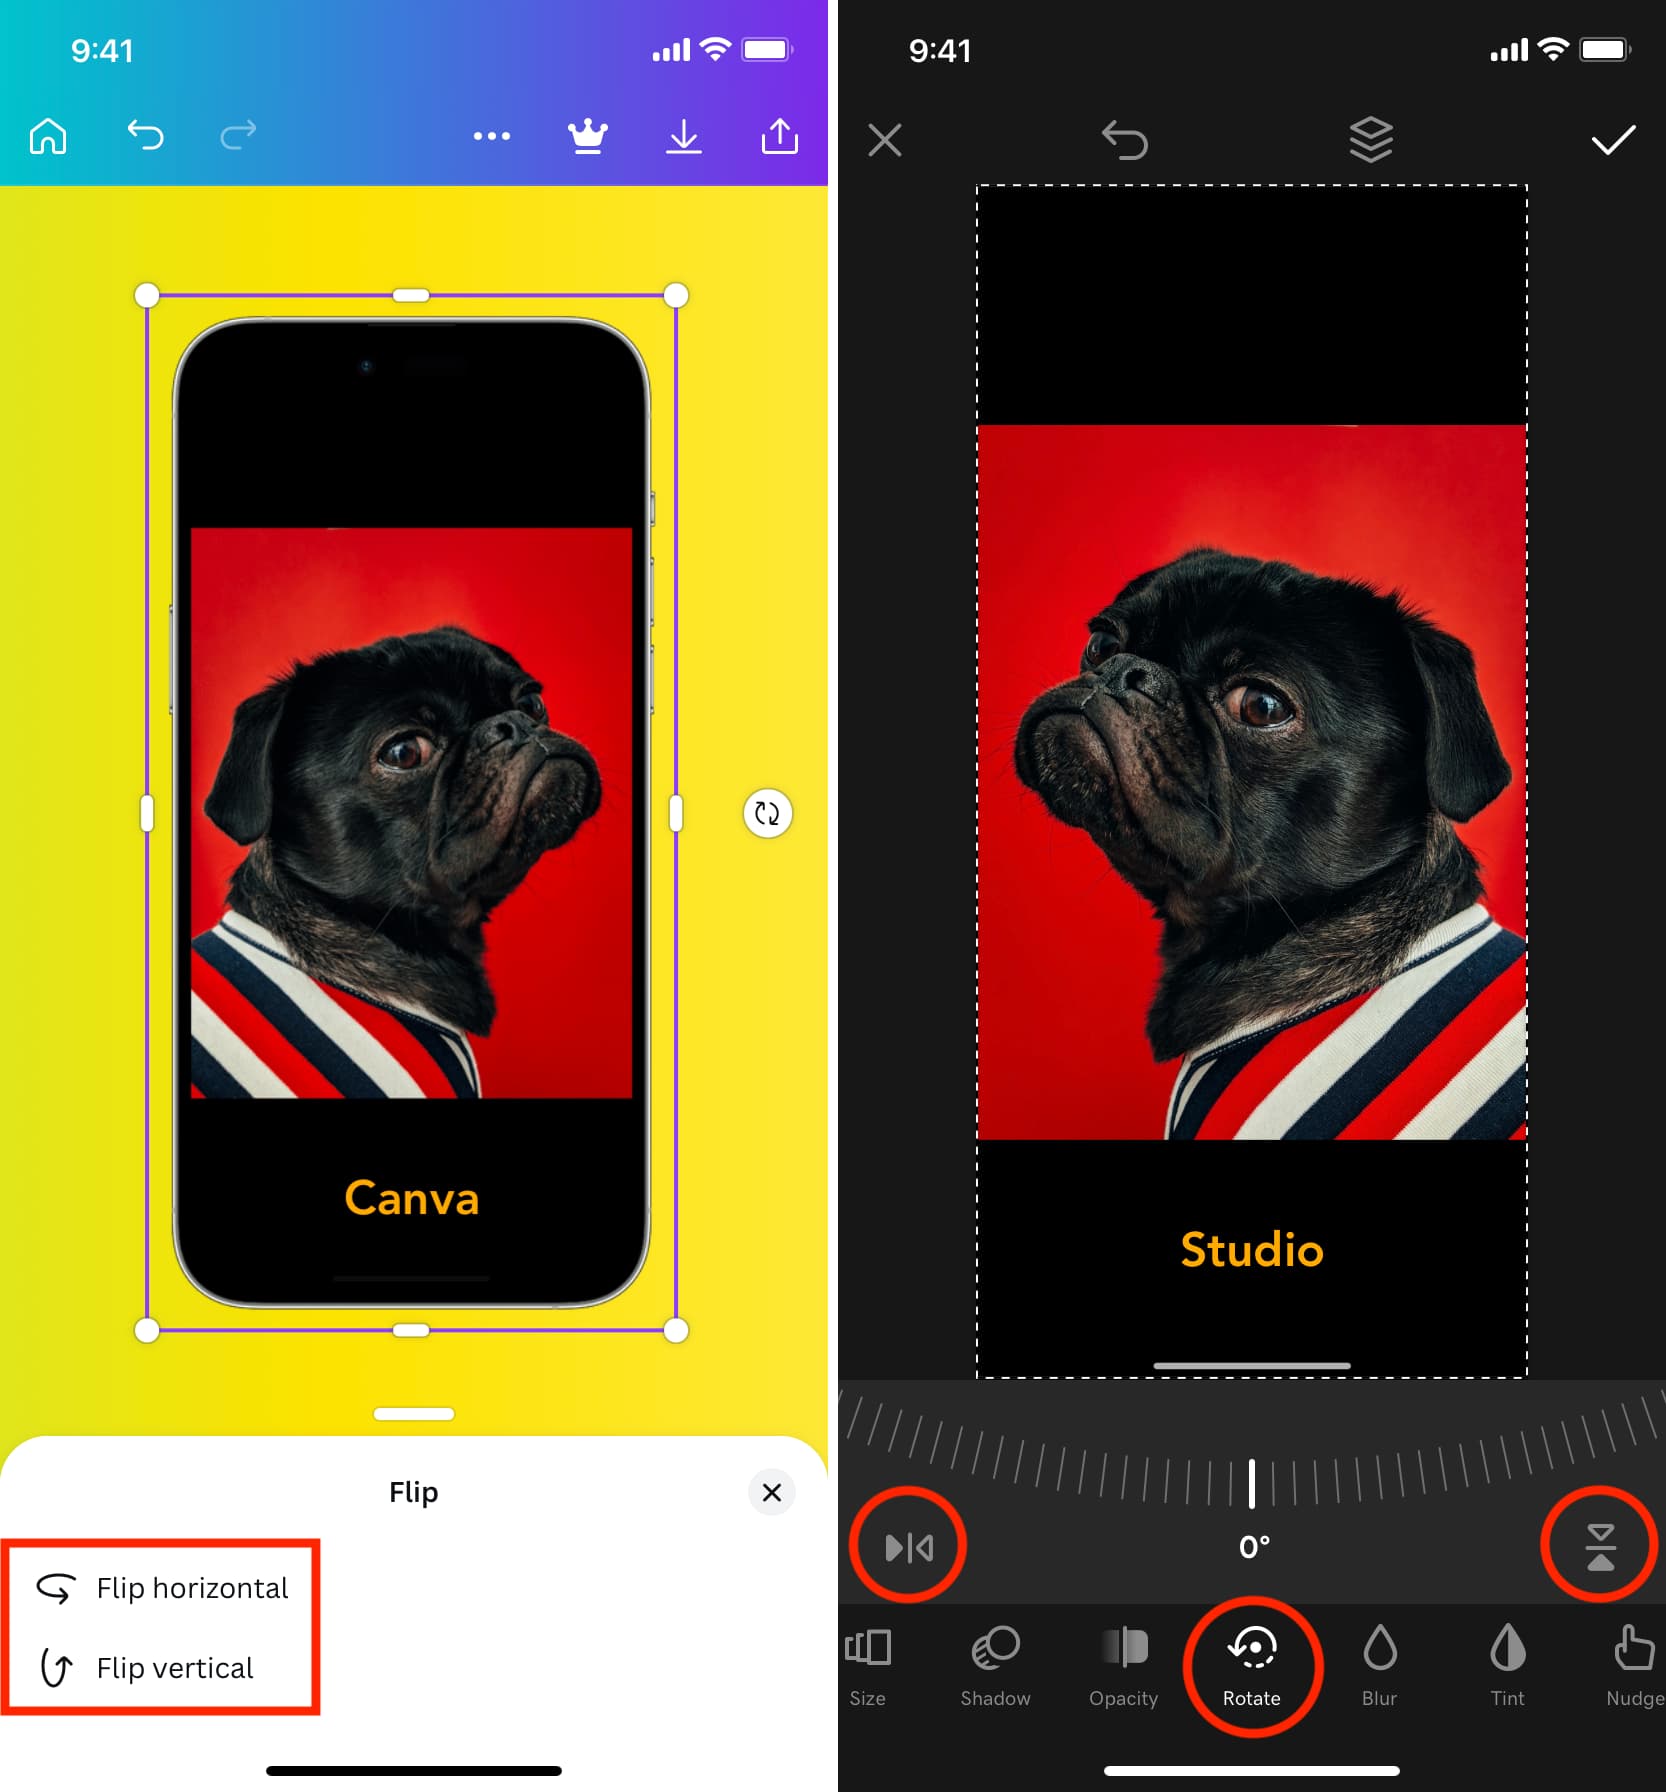 Flip photo in Canva and Studio apps on iPhone